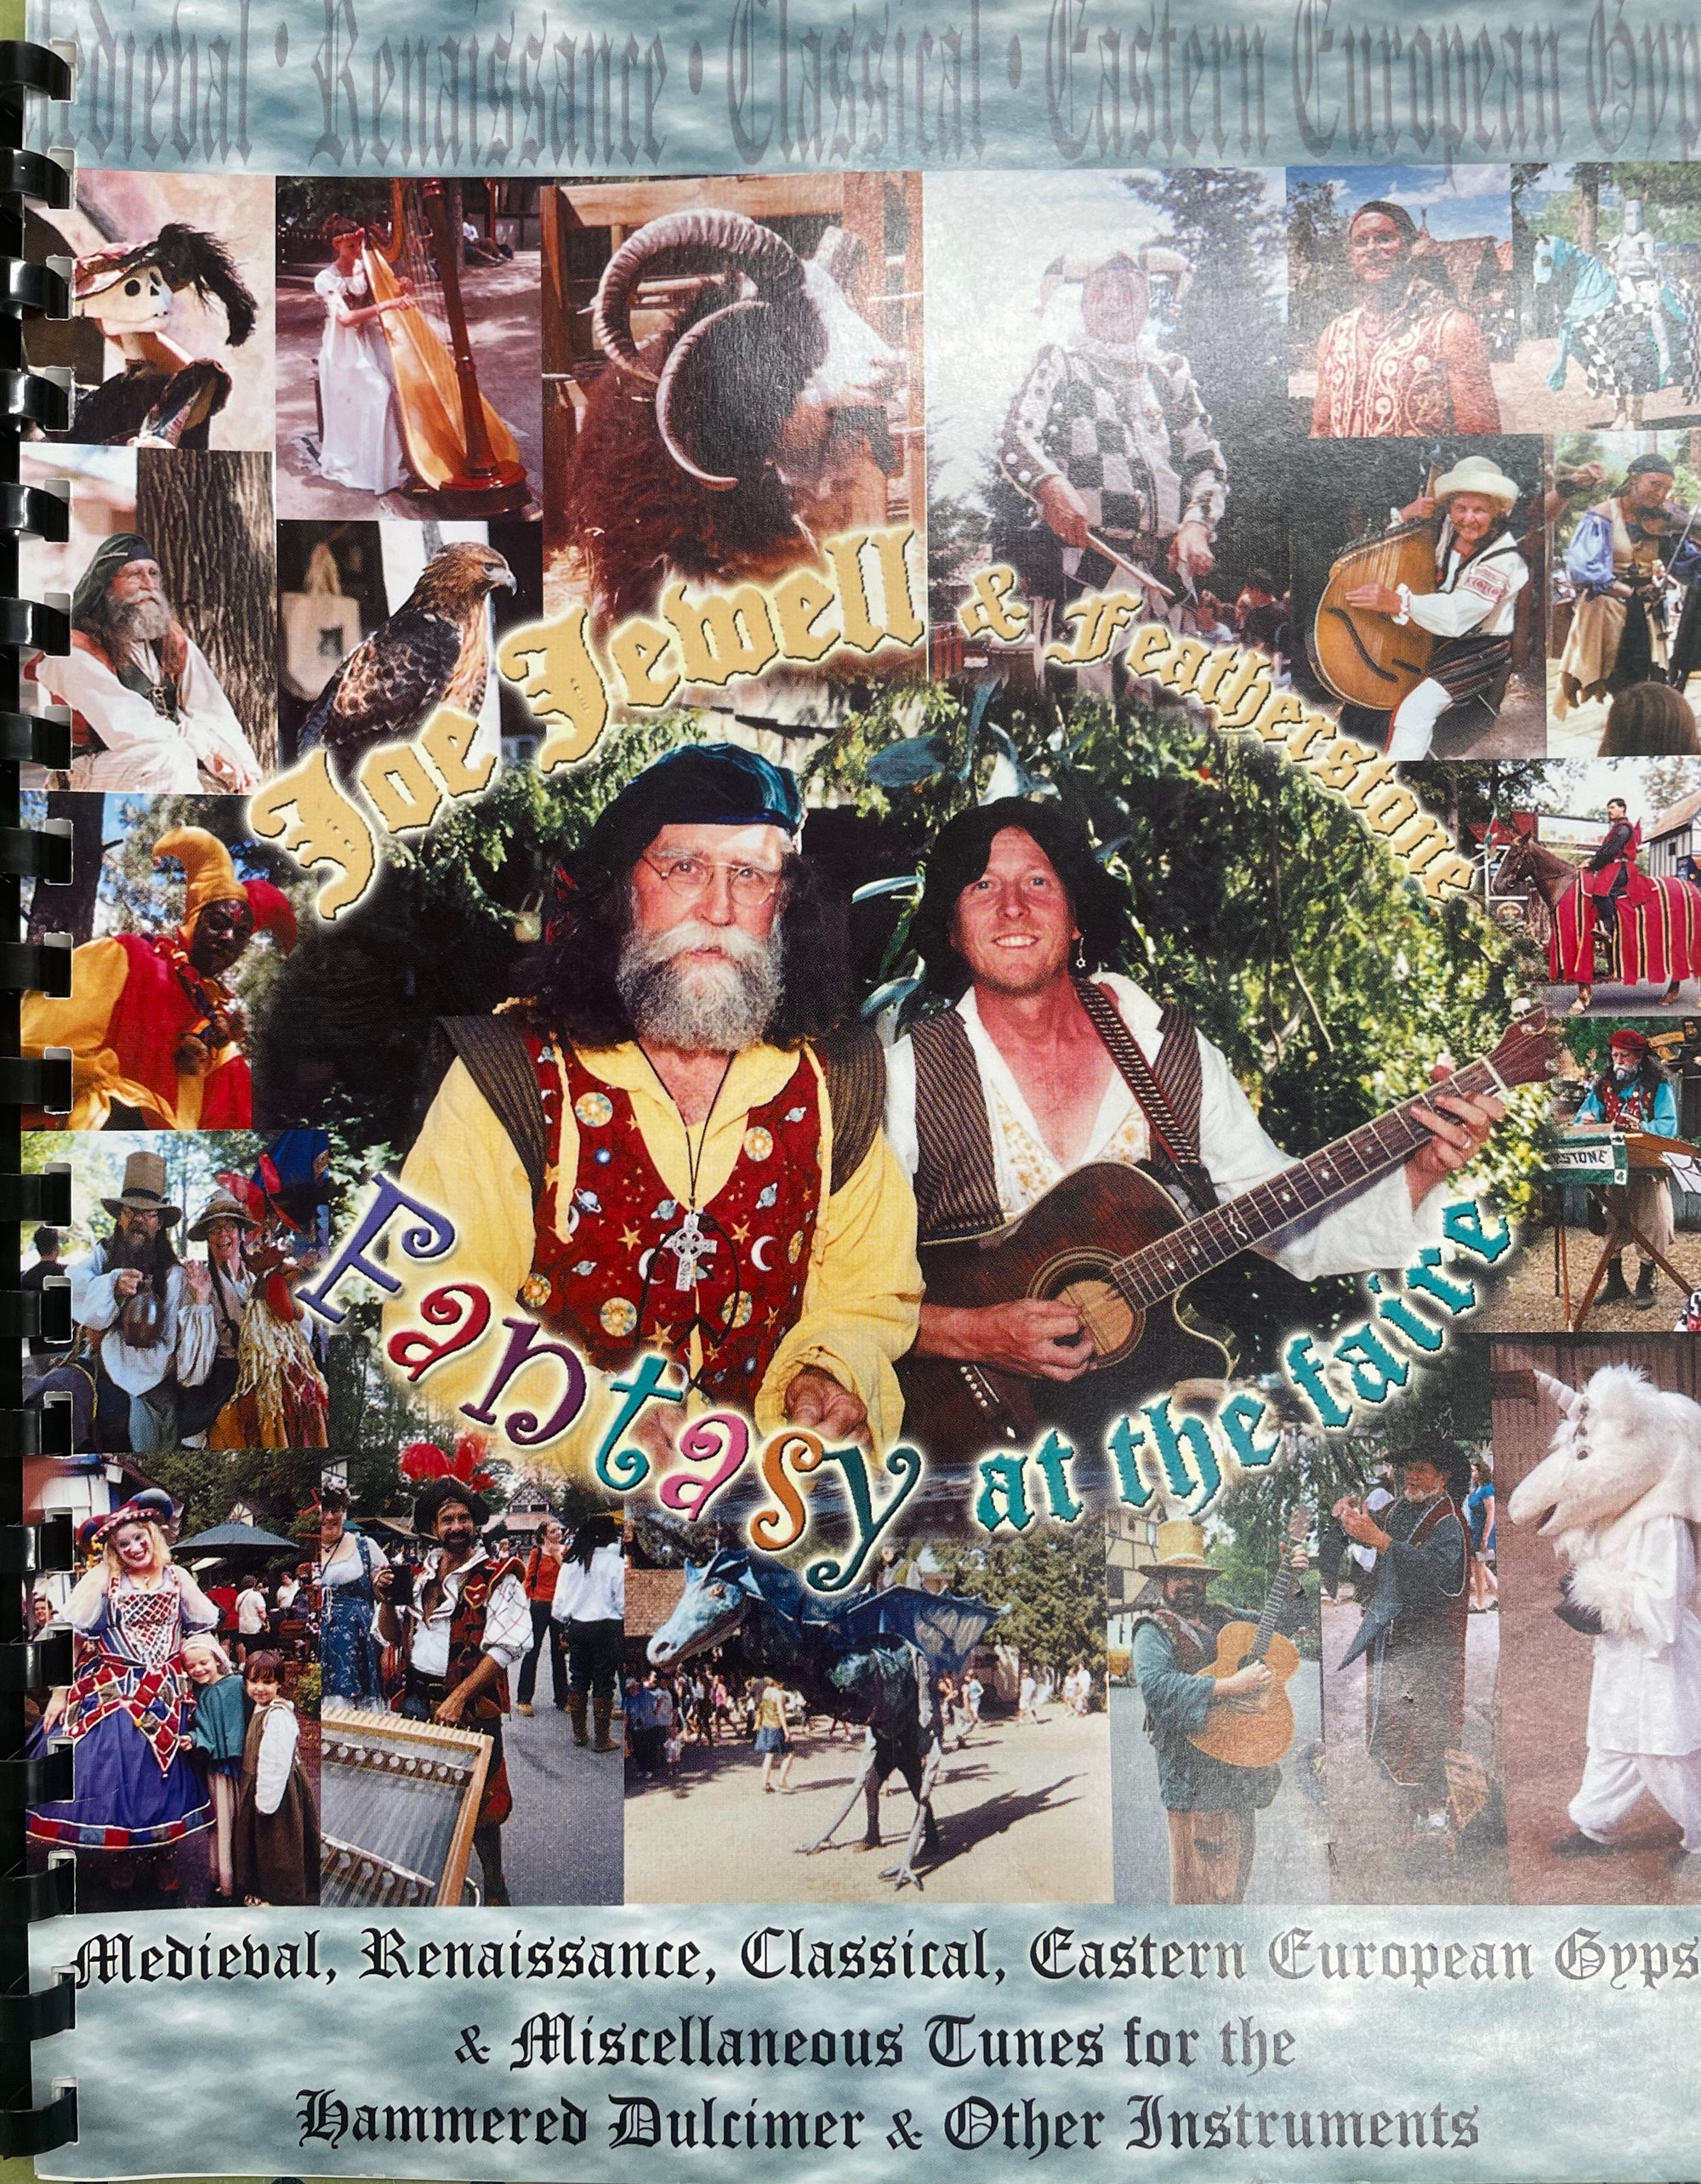 Collage of medieval and Renaissance fair scenes with people in historical costumes playing hammered dulcimers. Title: "Fantasy at the Faire by Joe Jewell." Enjoy the enchanting soundscape of medieval tunes performed with intermediate skill level precision amidst vibrant festivities.